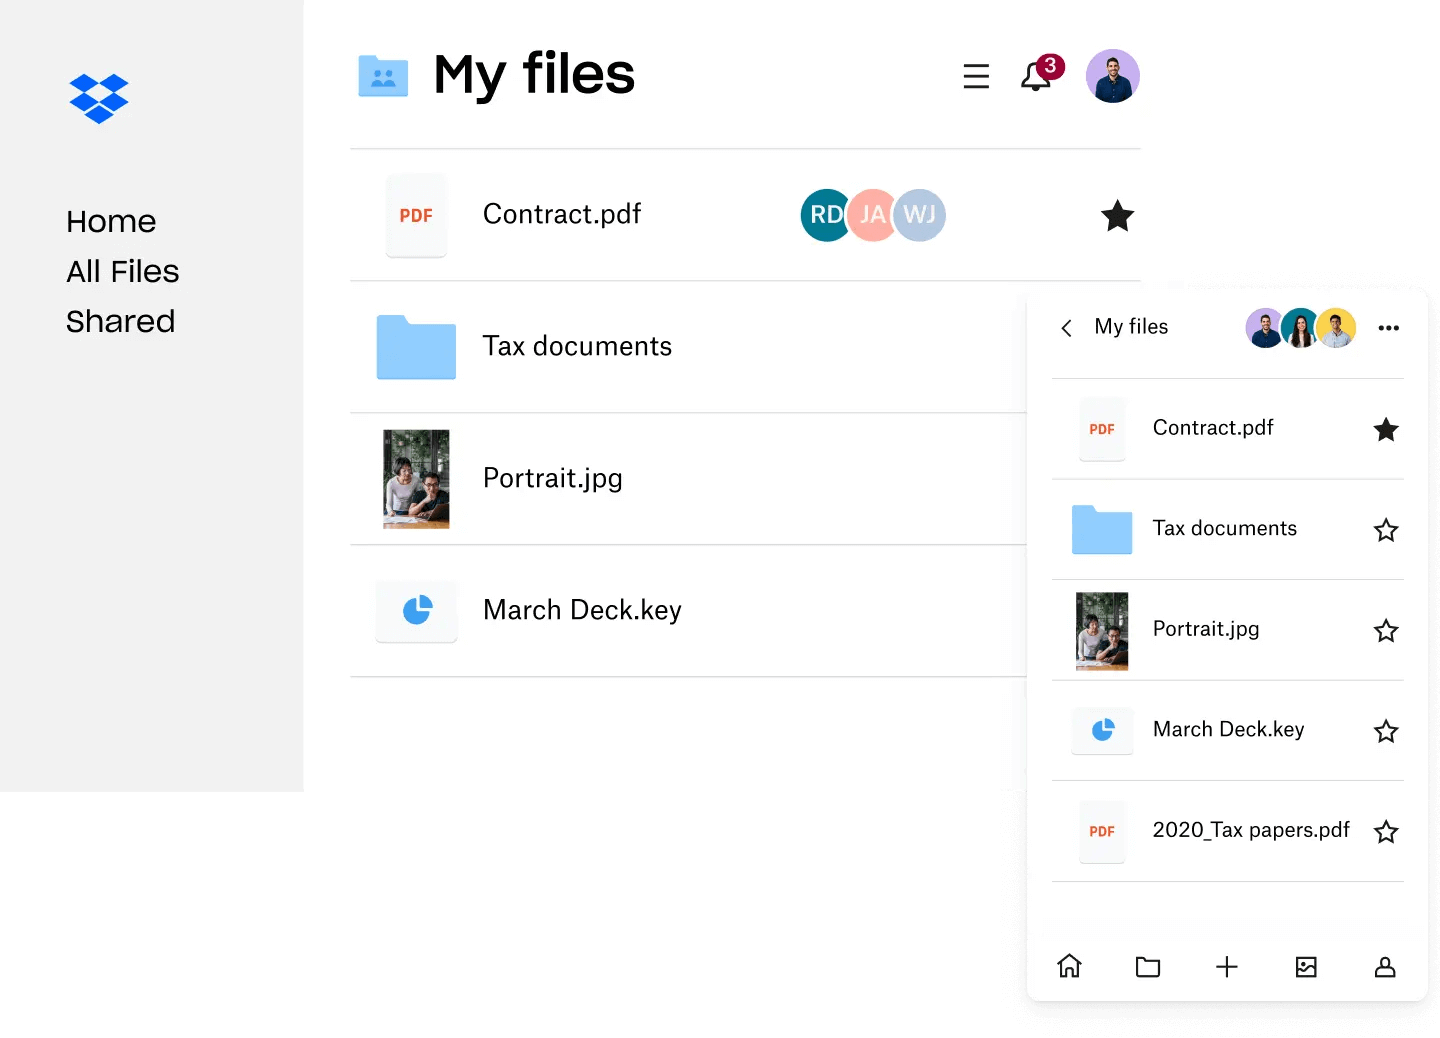 Image of files and folders that are organised and stored in Dropbox